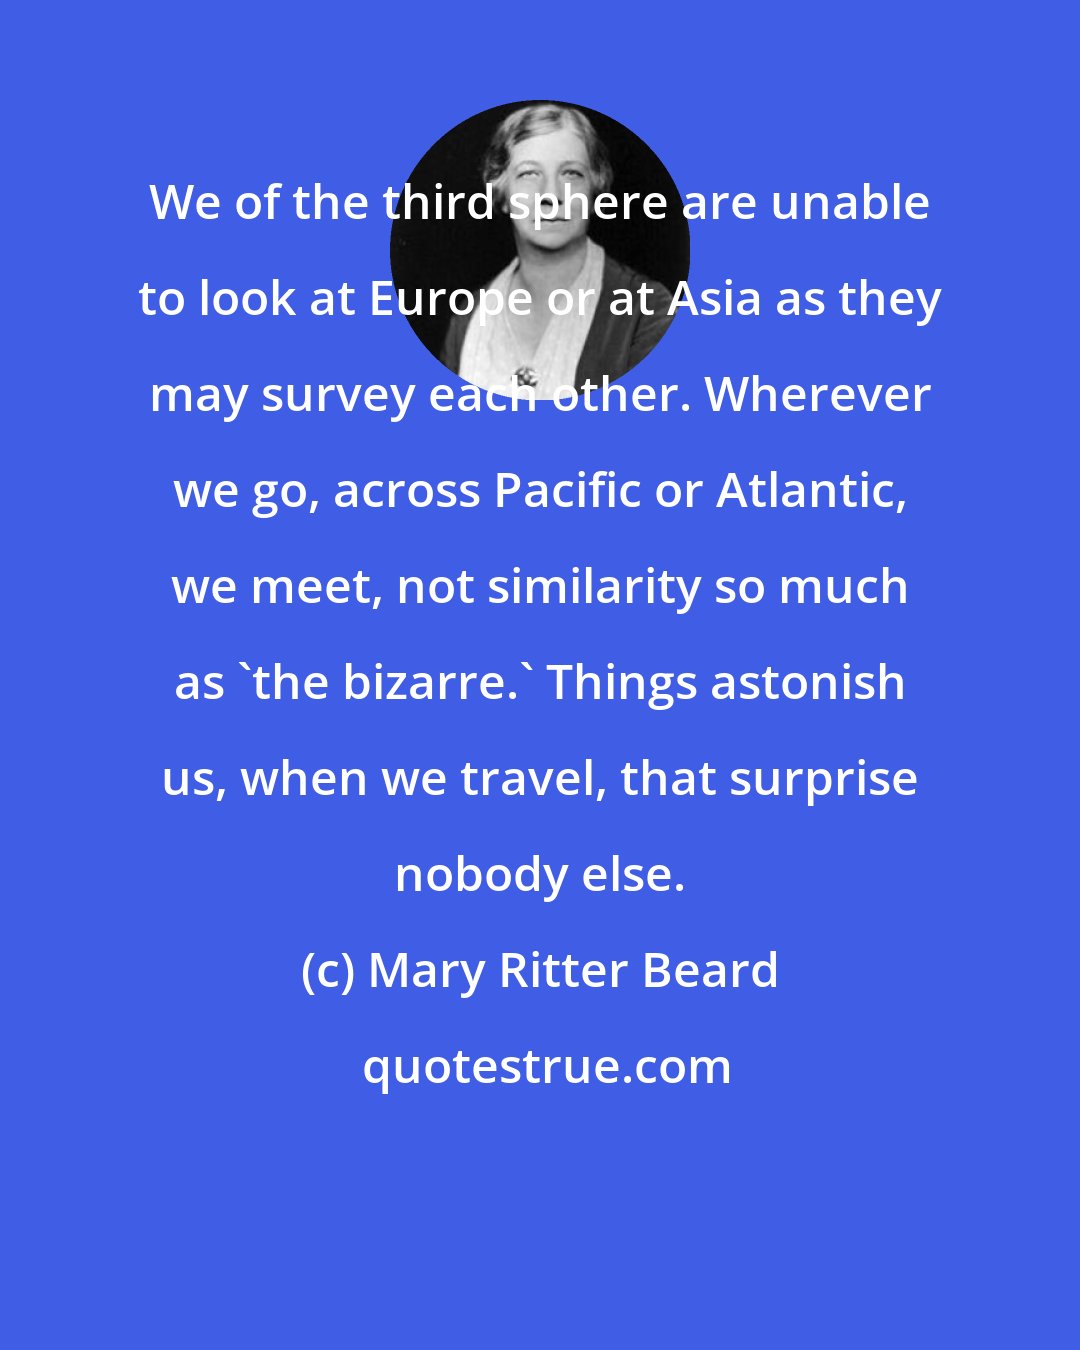 Mary Ritter Beard: We of the third sphere are unable to look at Europe or at Asia as they may survey each other. Wherever we go, across Pacific or Atlantic, we meet, not similarity so much as 'the bizarre.' Things astonish us, when we travel, that surprise nobody else.